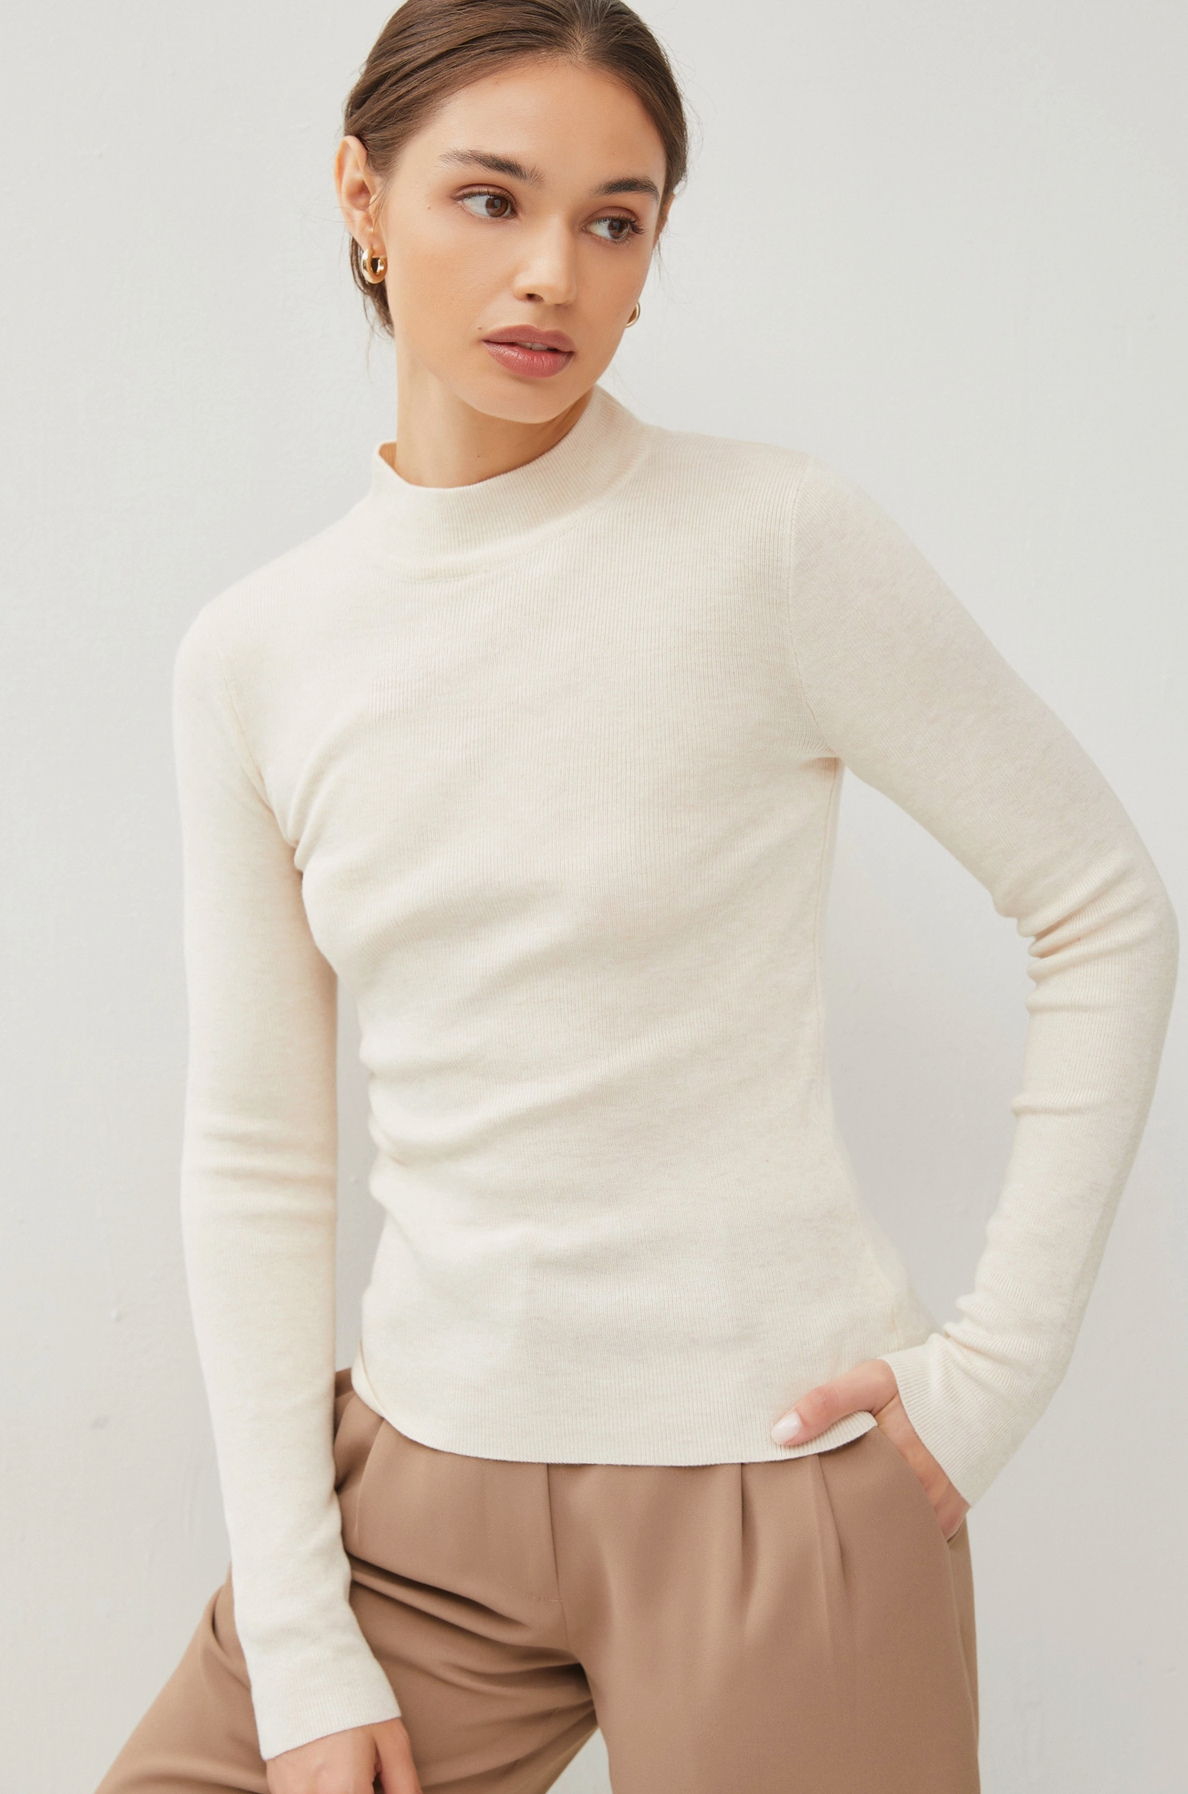 The Layer Sweater